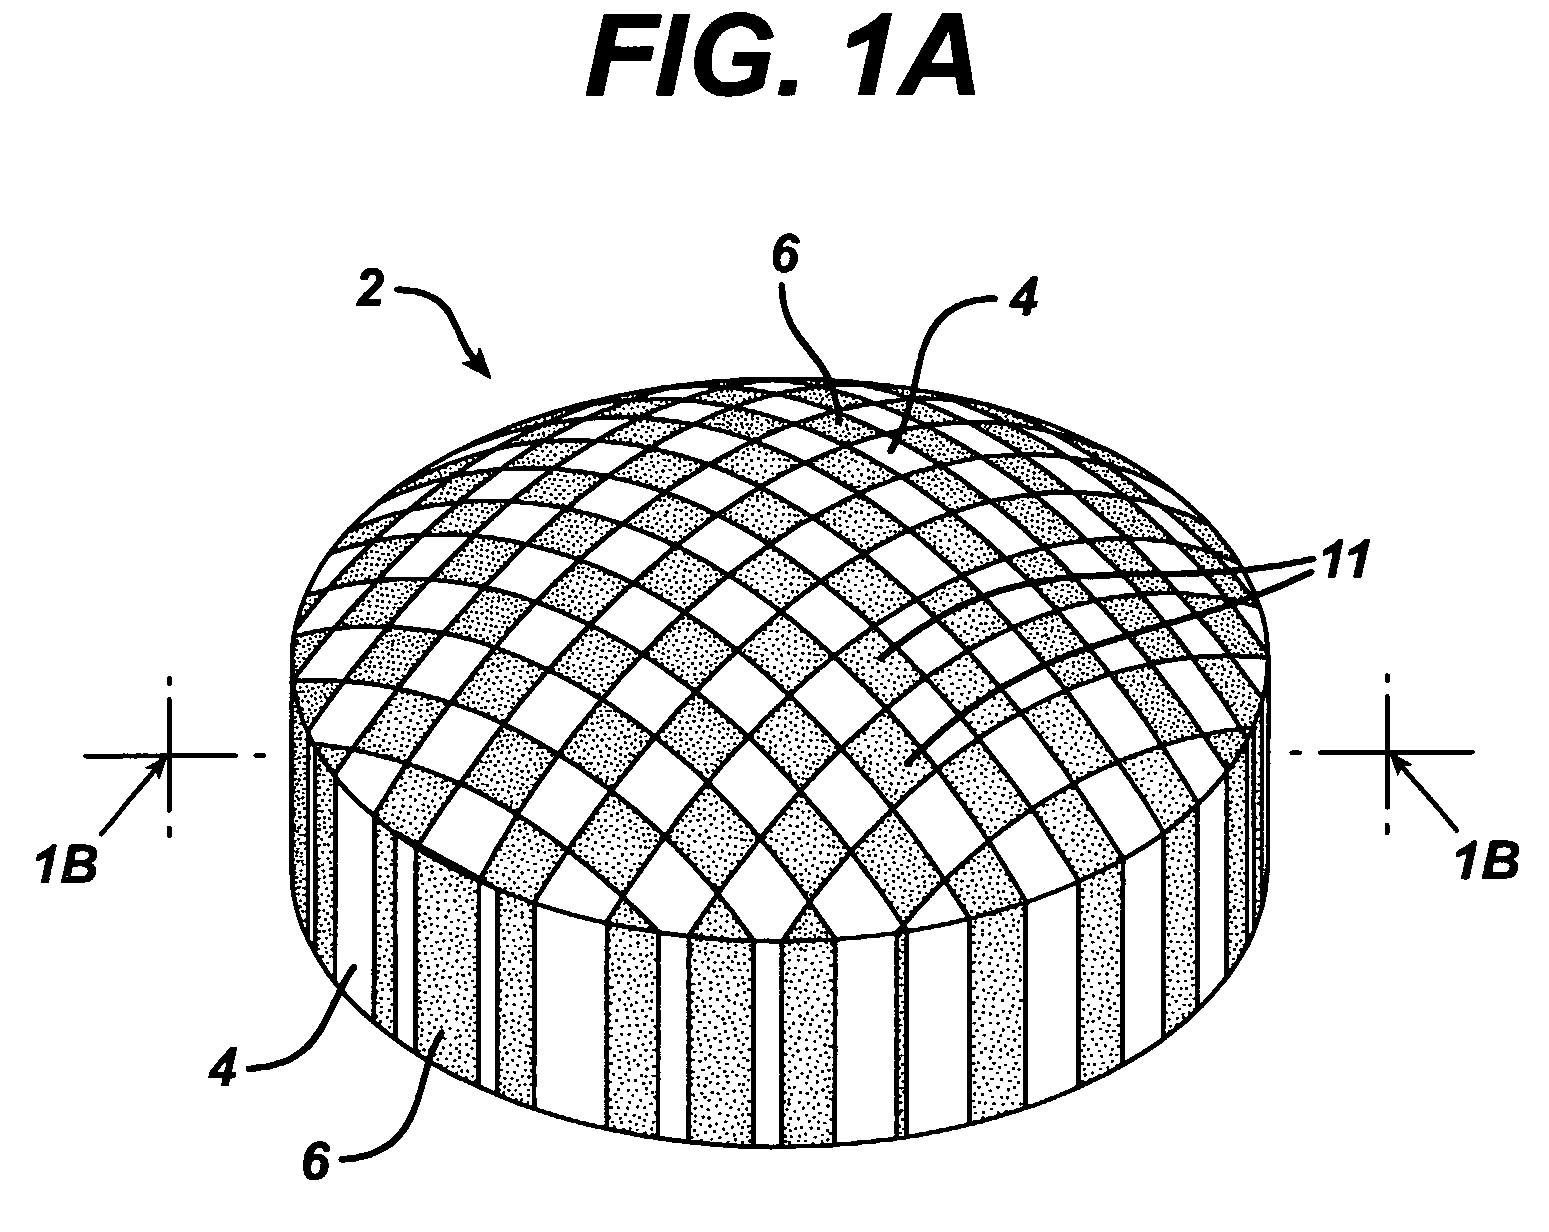 Dosage forms having a microreliefed surface and methods and apparatus for their production